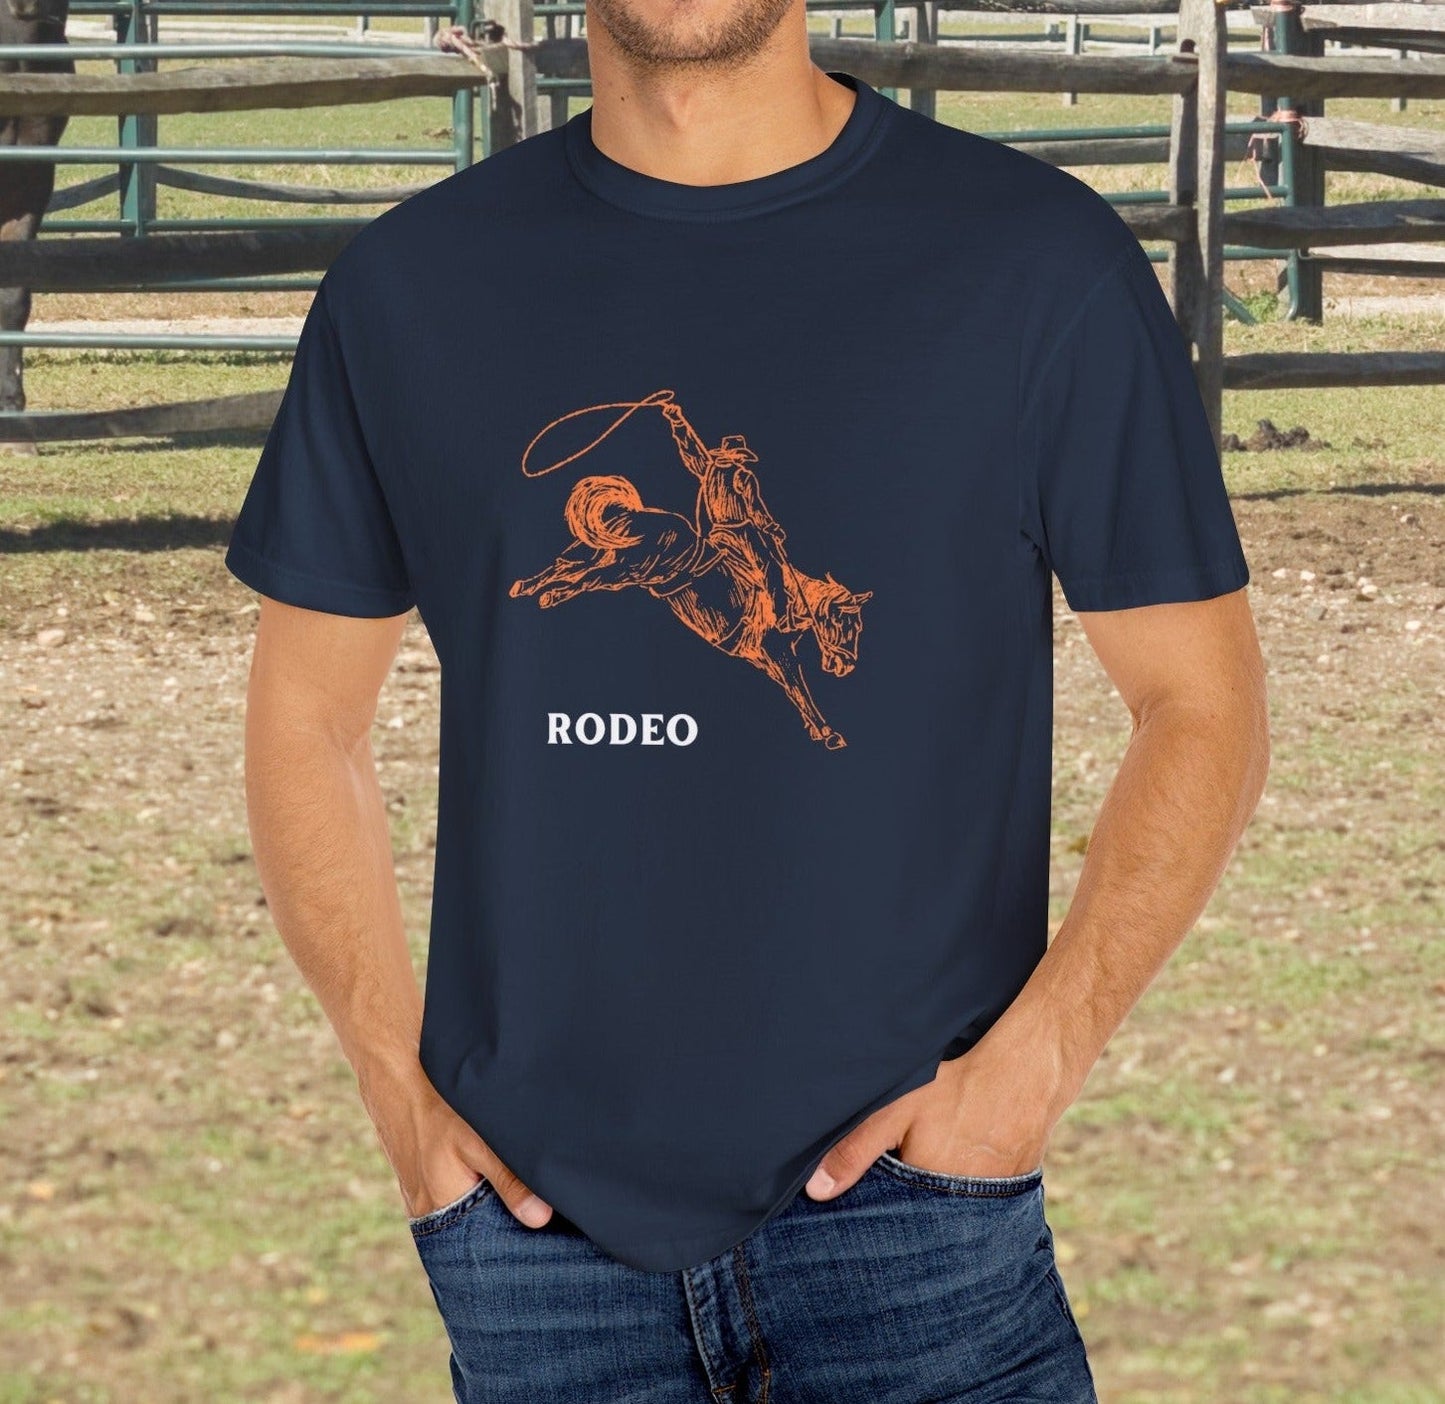 Rodeo T-shirt for Bronc Riding, Comfort Color Tee, Bronc Rider Horse, Country Boy Life - FlooredByArt